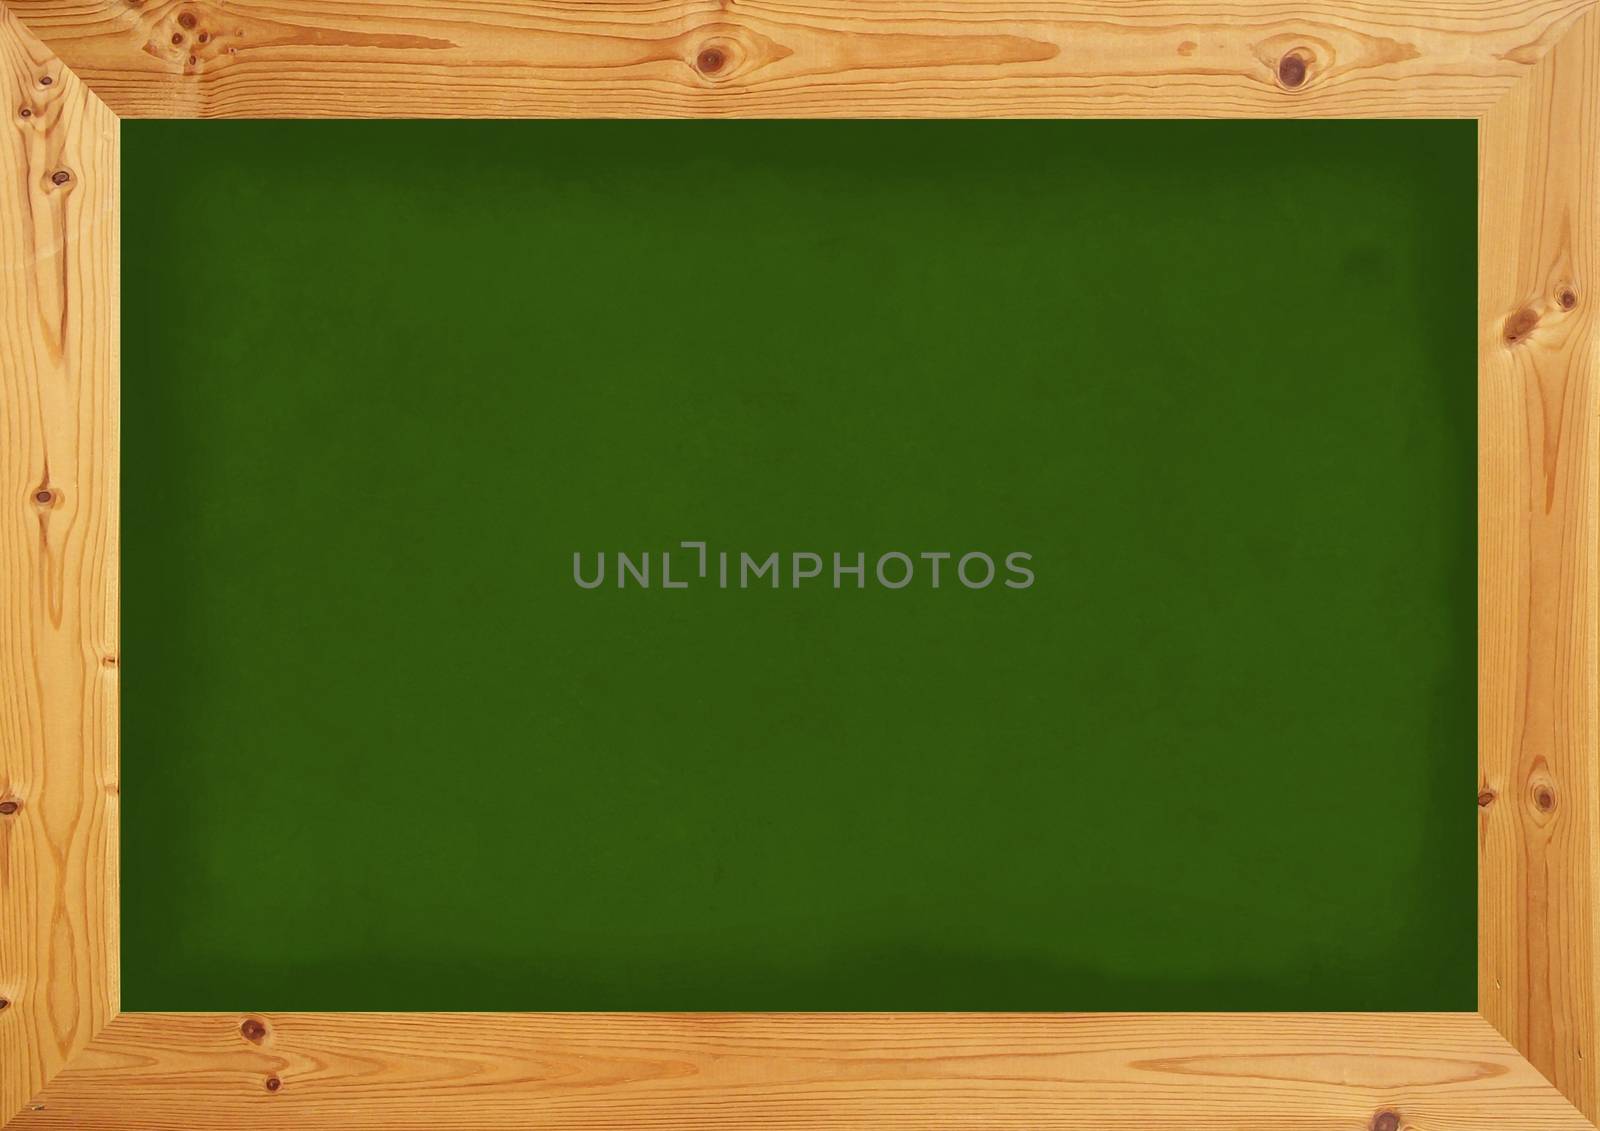 Illustration of a green Chalkboard with wooden framework